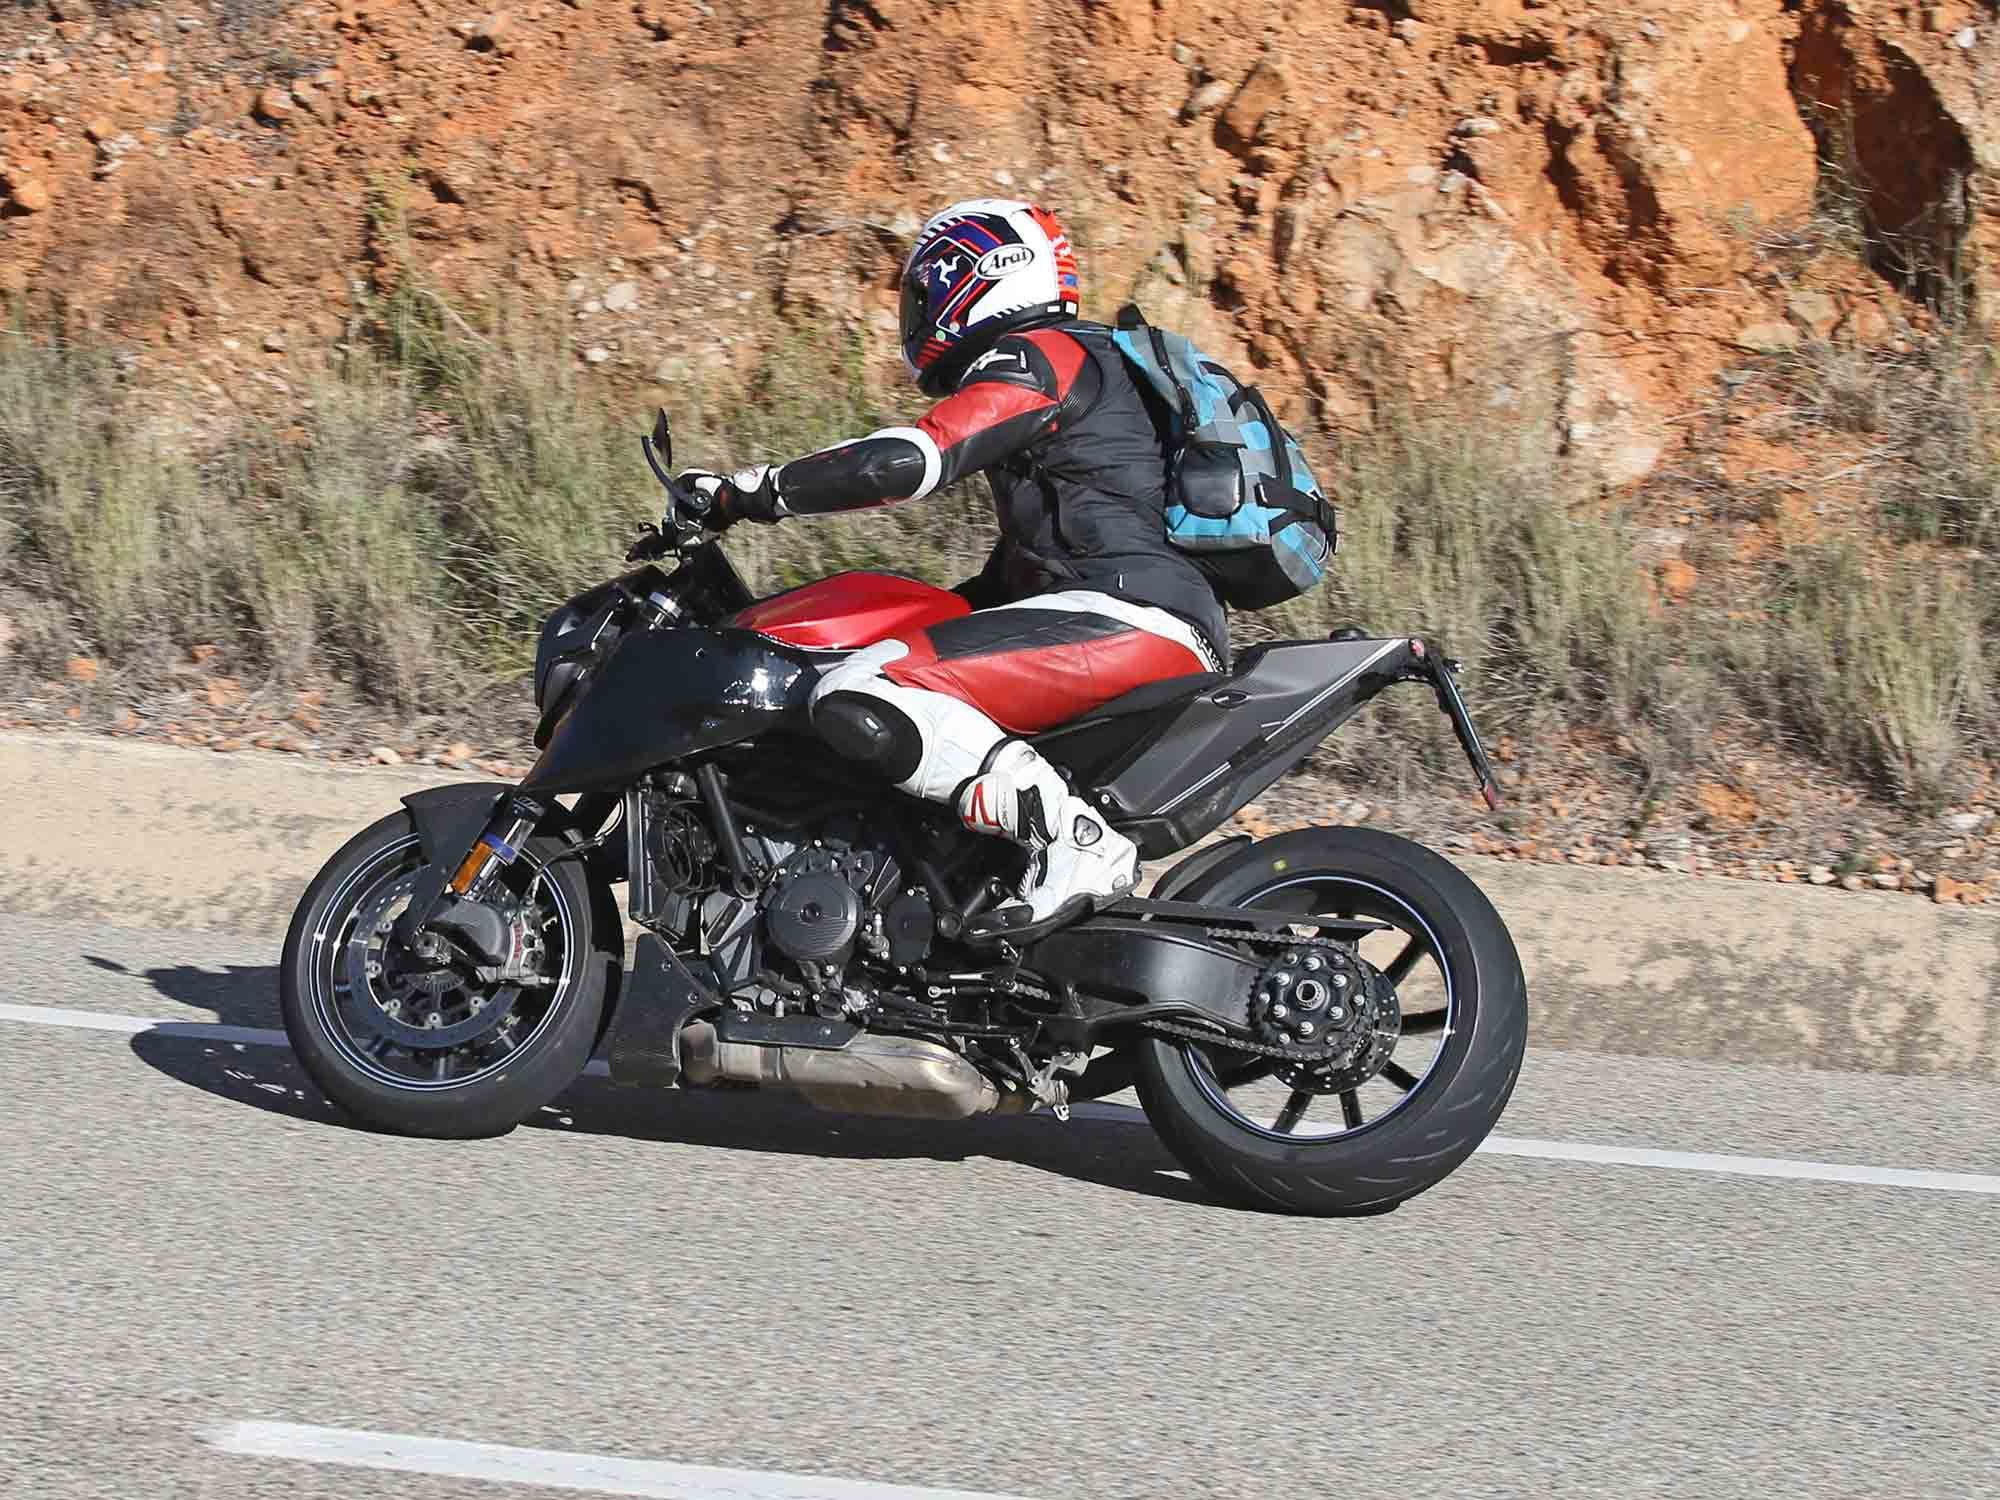 Already-published details include specs that are nearly identical to KTM’s 1290 Super Duke RR.